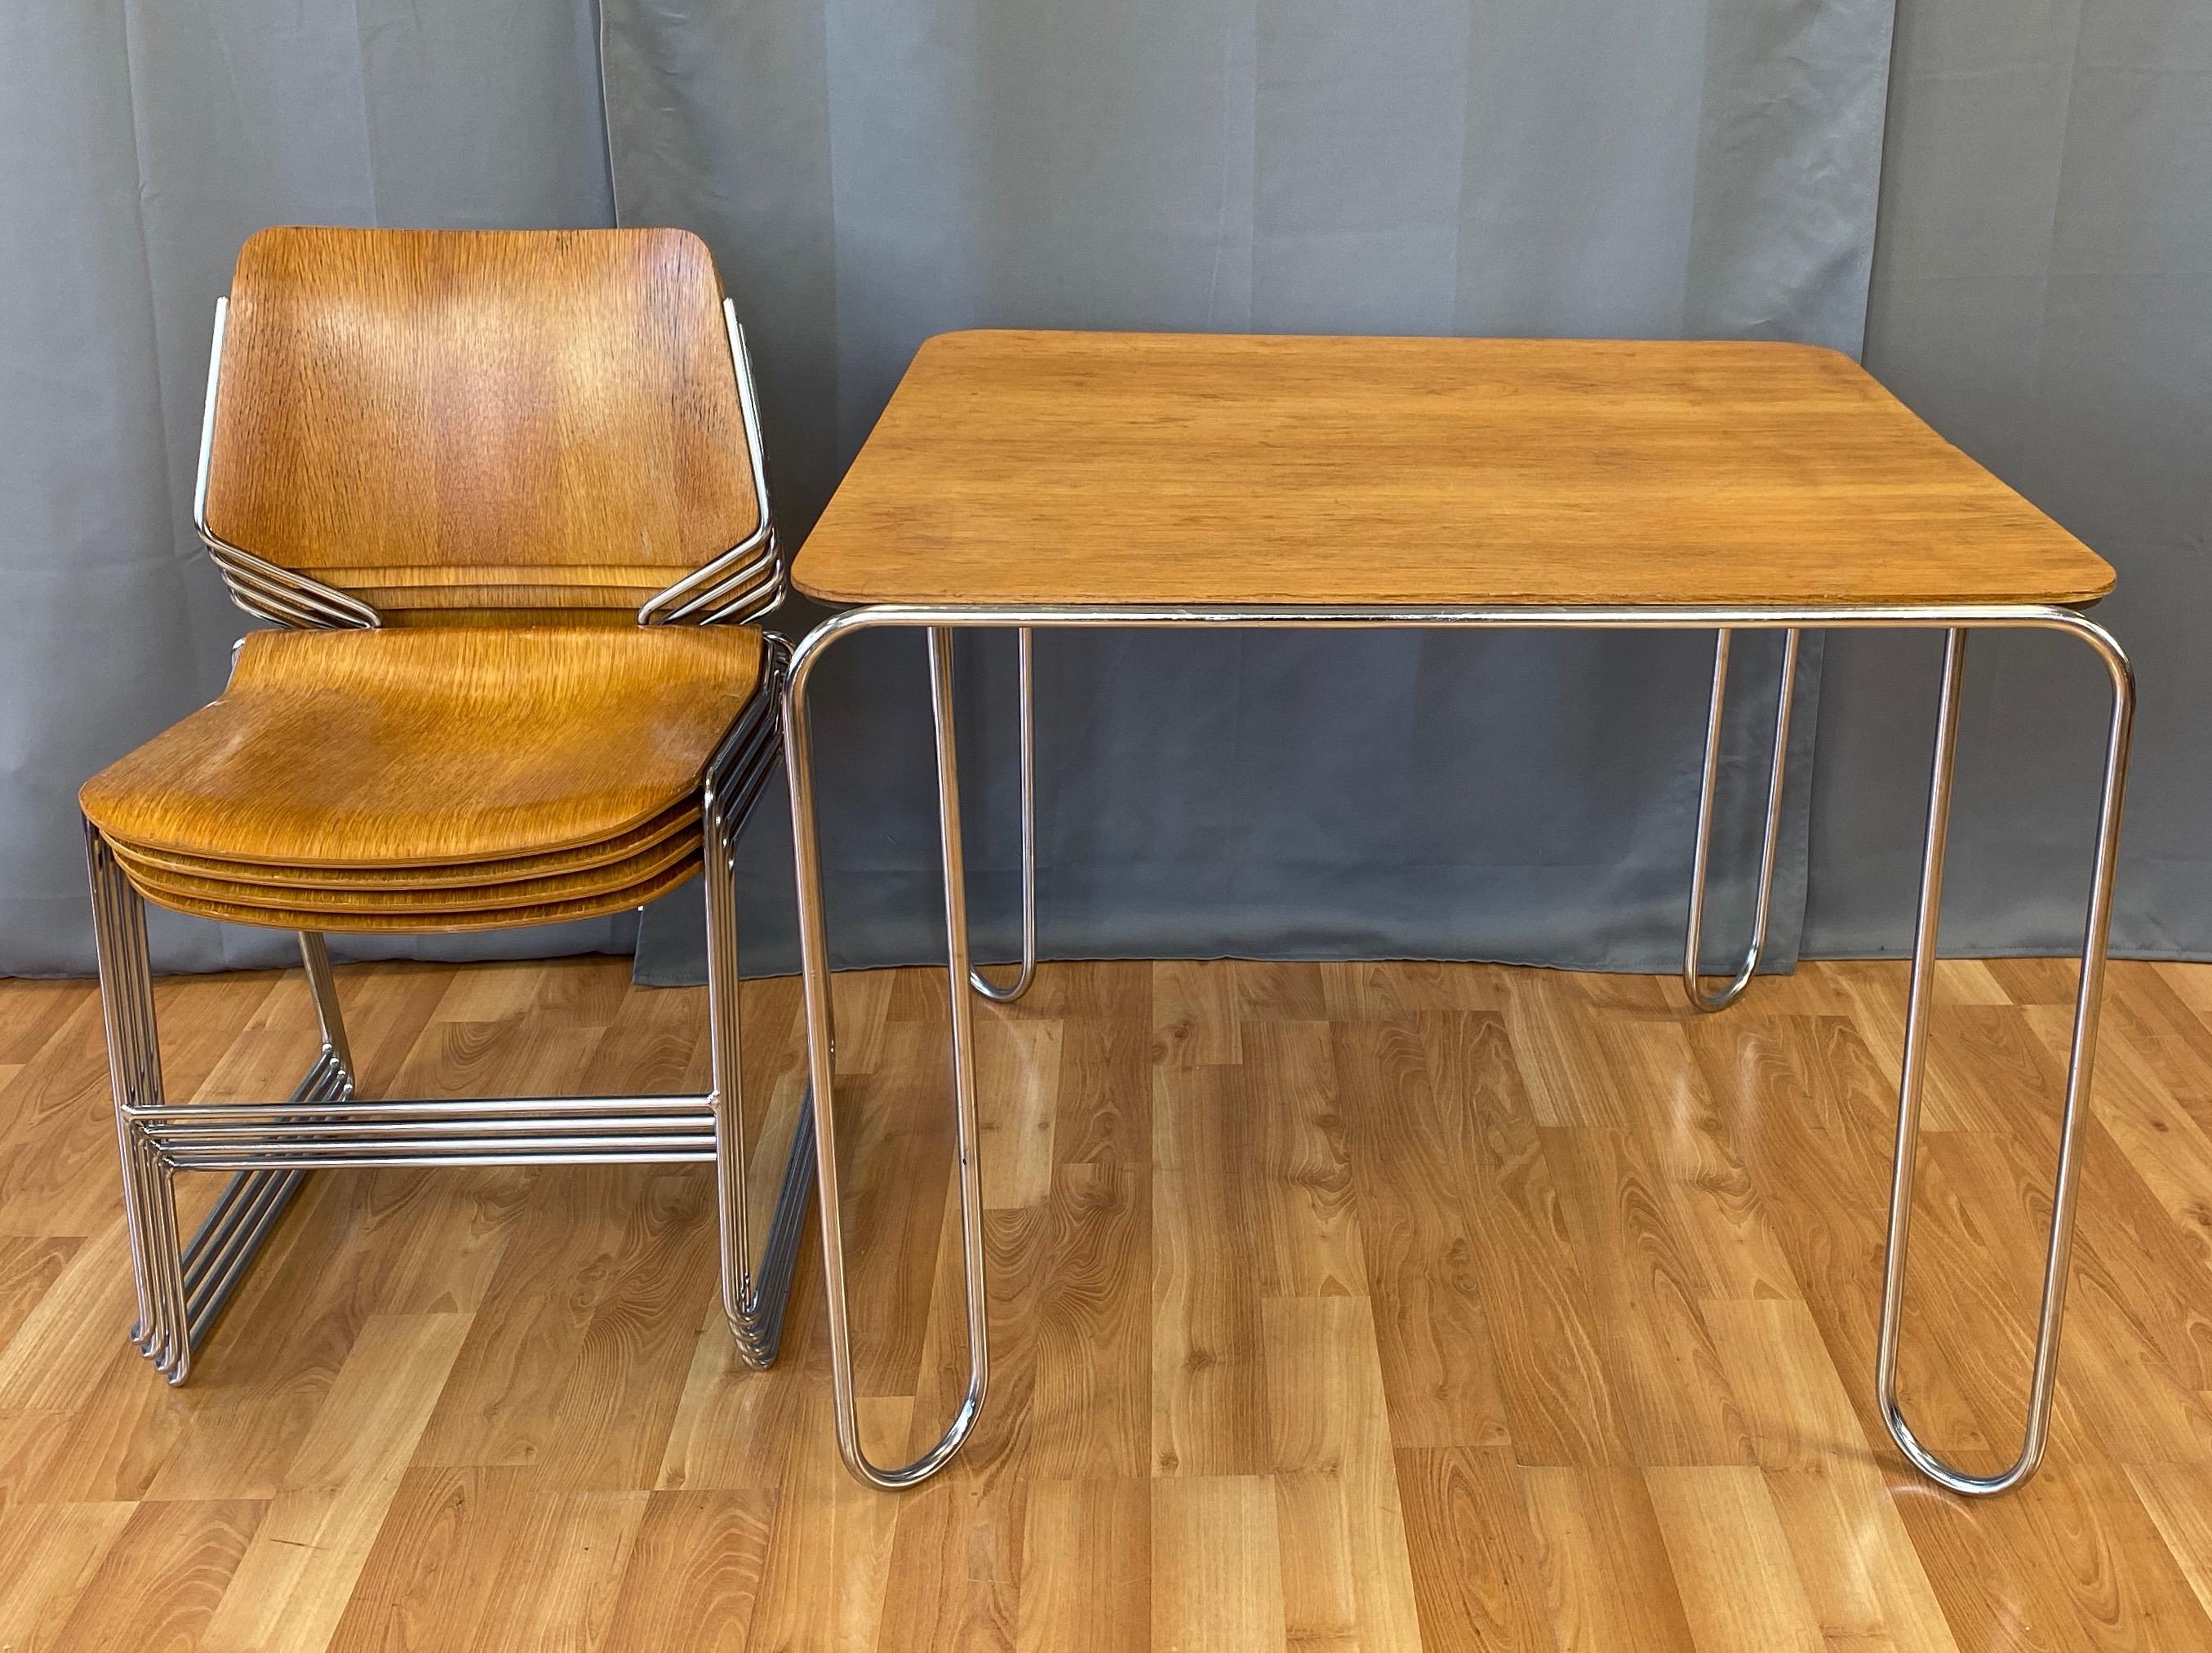 A five-piece set of four oak 40/4 stacking chairs and matching table by David Rowland, likely from the late 1960s or early 1970s.

Chair with oak veneer over bentwood seat and back on chrome finish steel rod frame. Has a spare yet elegant aesthetic,